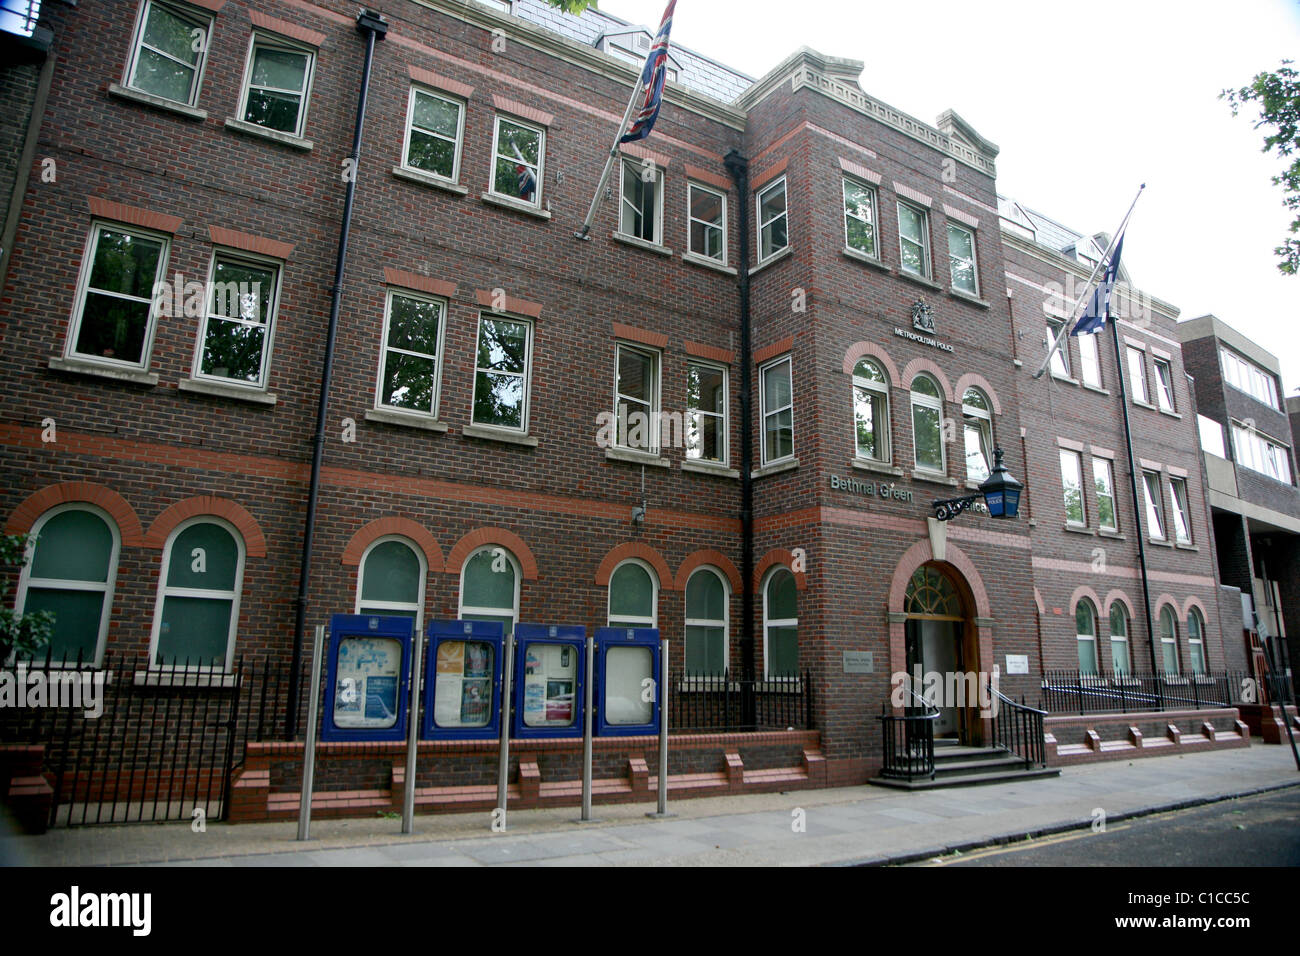 General View GV of Bethnal Green Police Station in Bethnal Green, London, England. Stock Photo